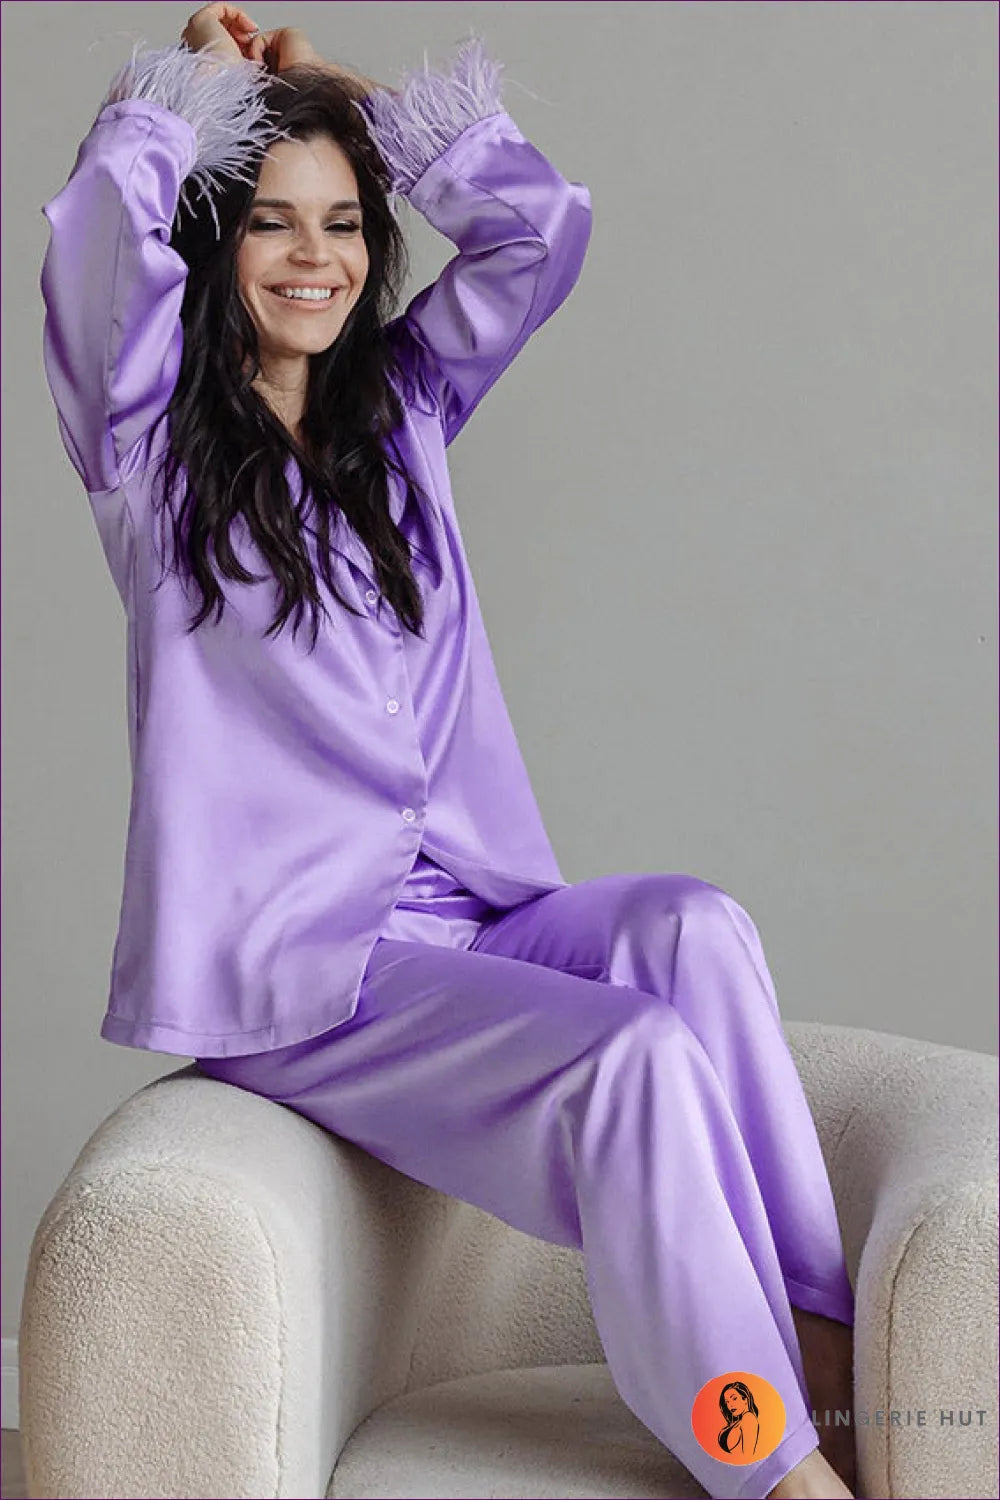 Discover The Essence Of Nocturnal Bliss With Lingerie Hut’s Feather Satin Loungewear Set - a Haven Comfort In